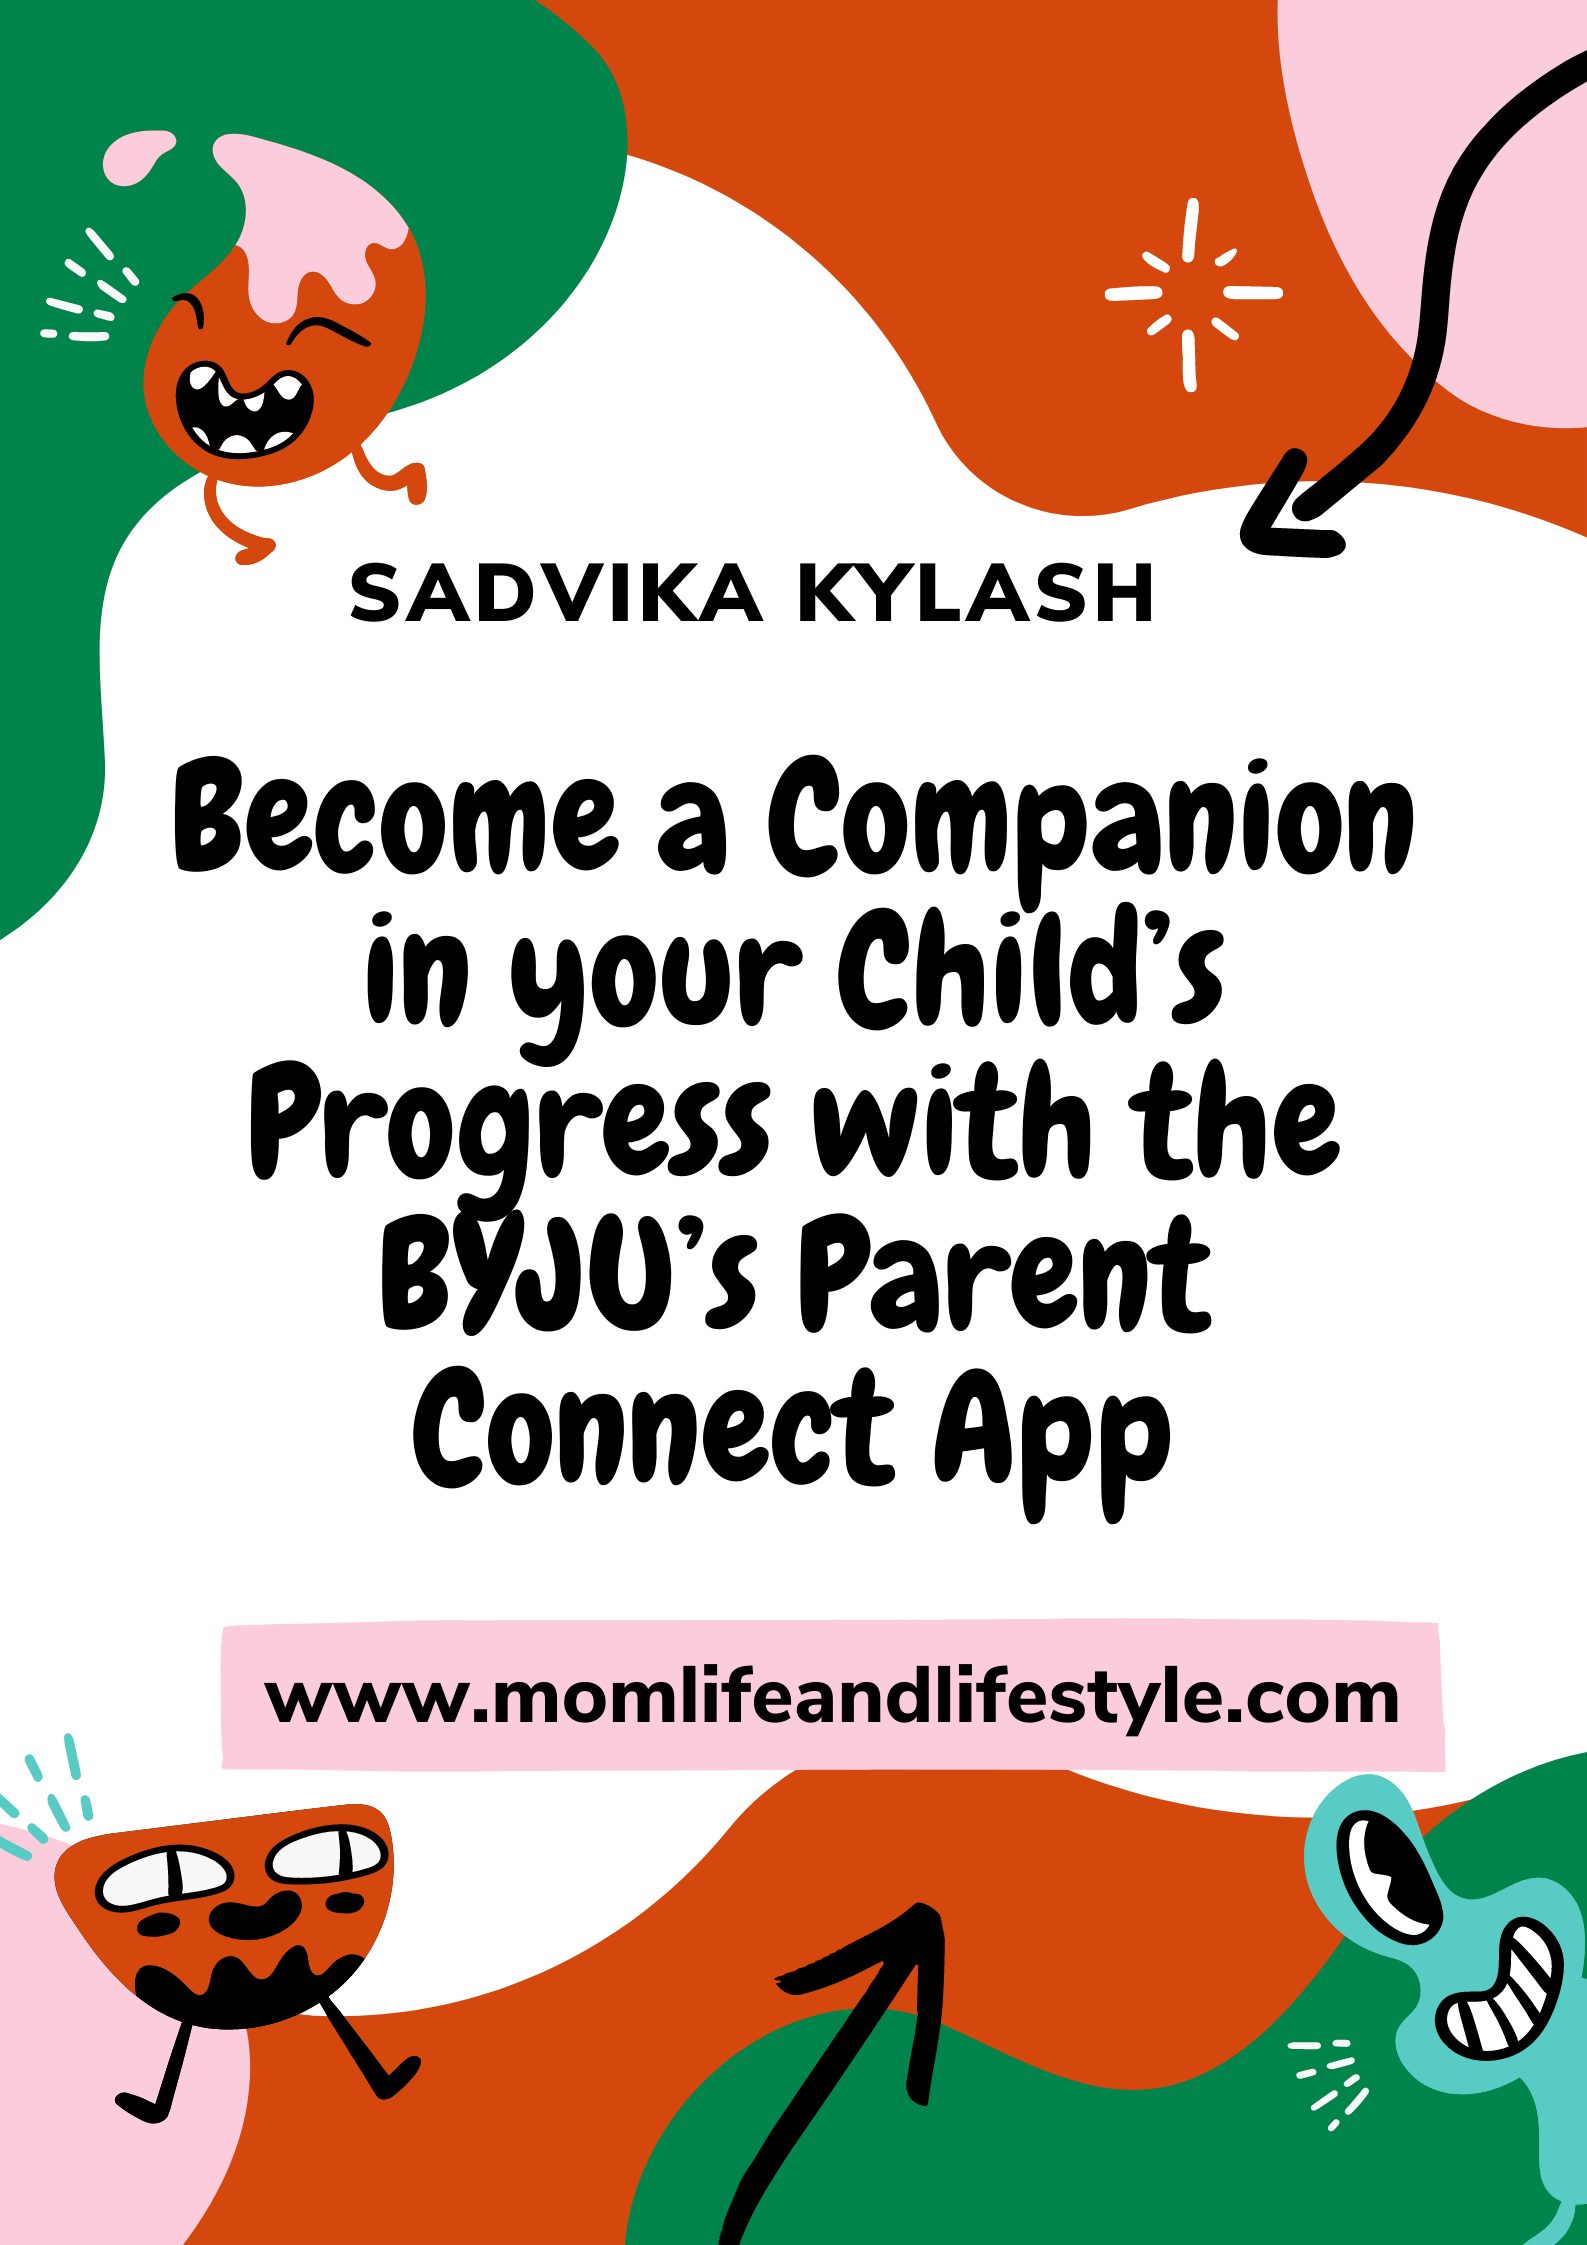 Become a Companion in your Child’s Progress with the BYJU’s Parent Connect App